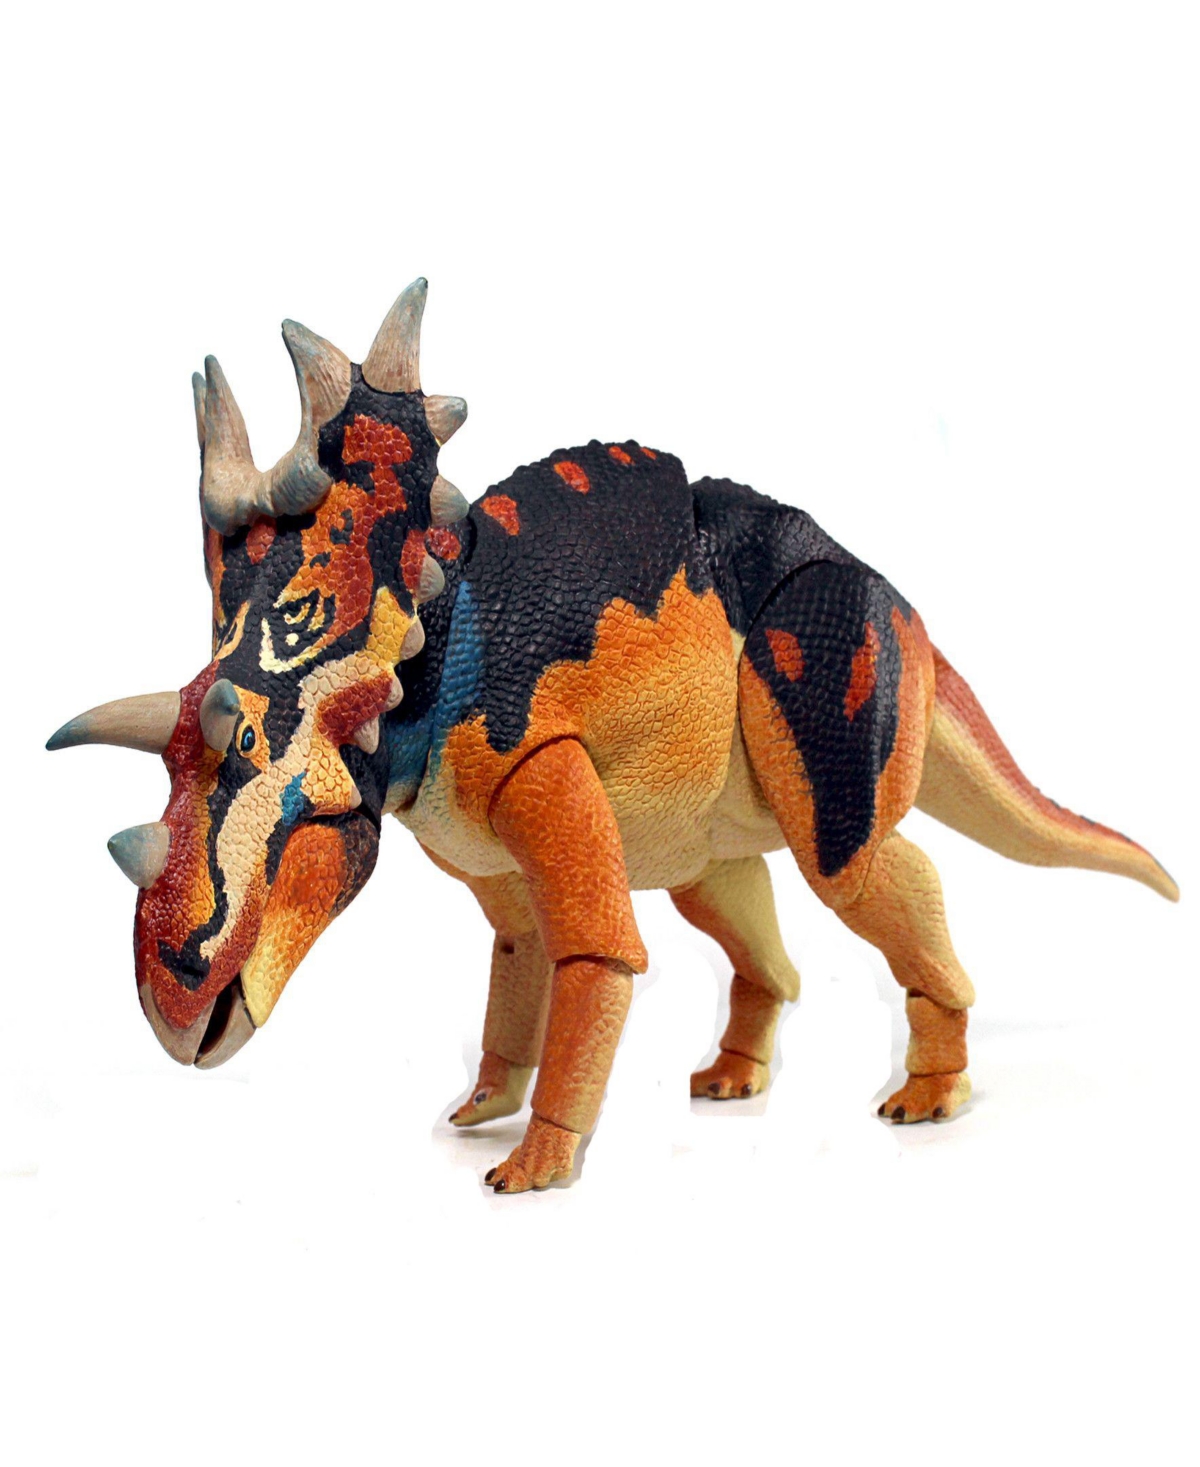 Beasts Of The Mesozoic Spiclypeus Shipporum Dinosaur Action Figure In Multi